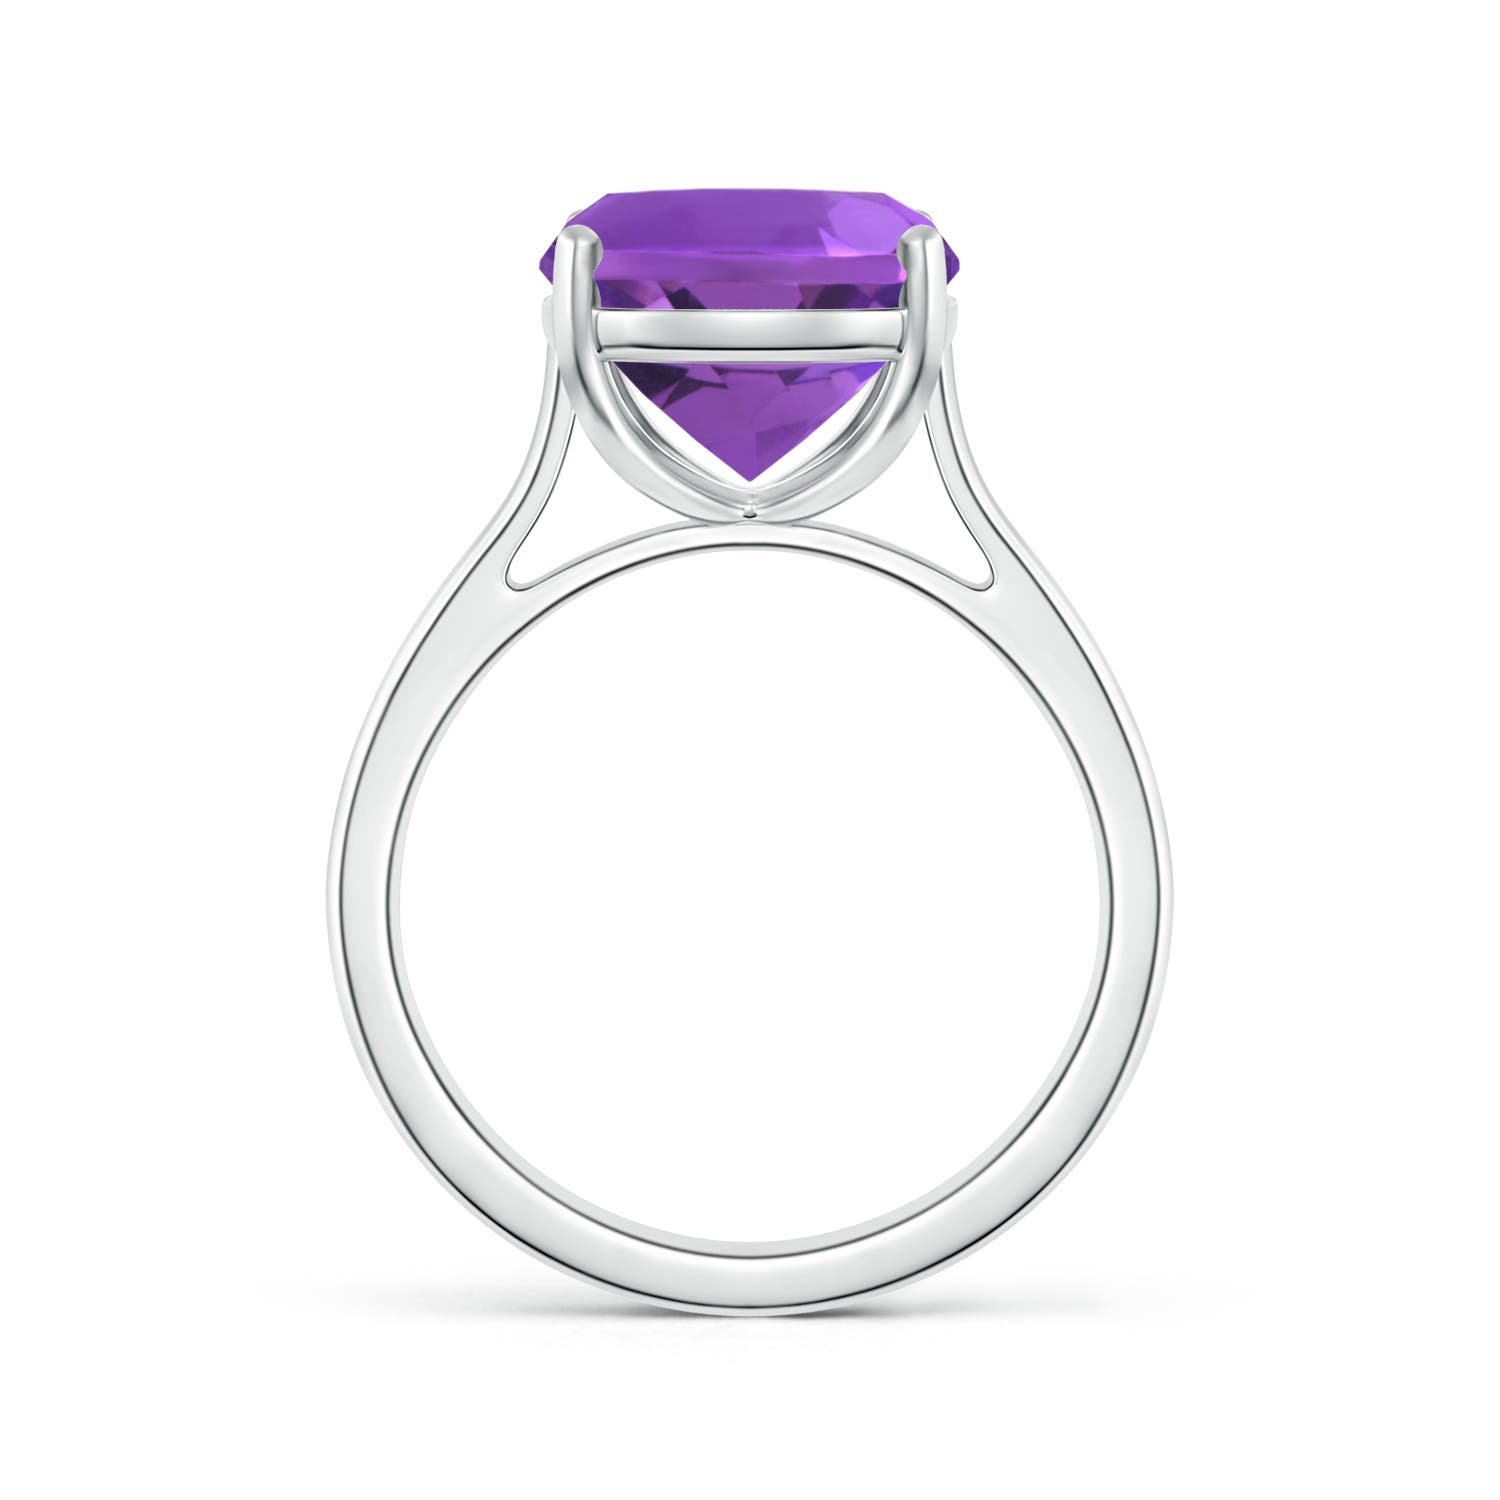 AAA - Amethyst / 4.64 CT / 14 KT White Gold